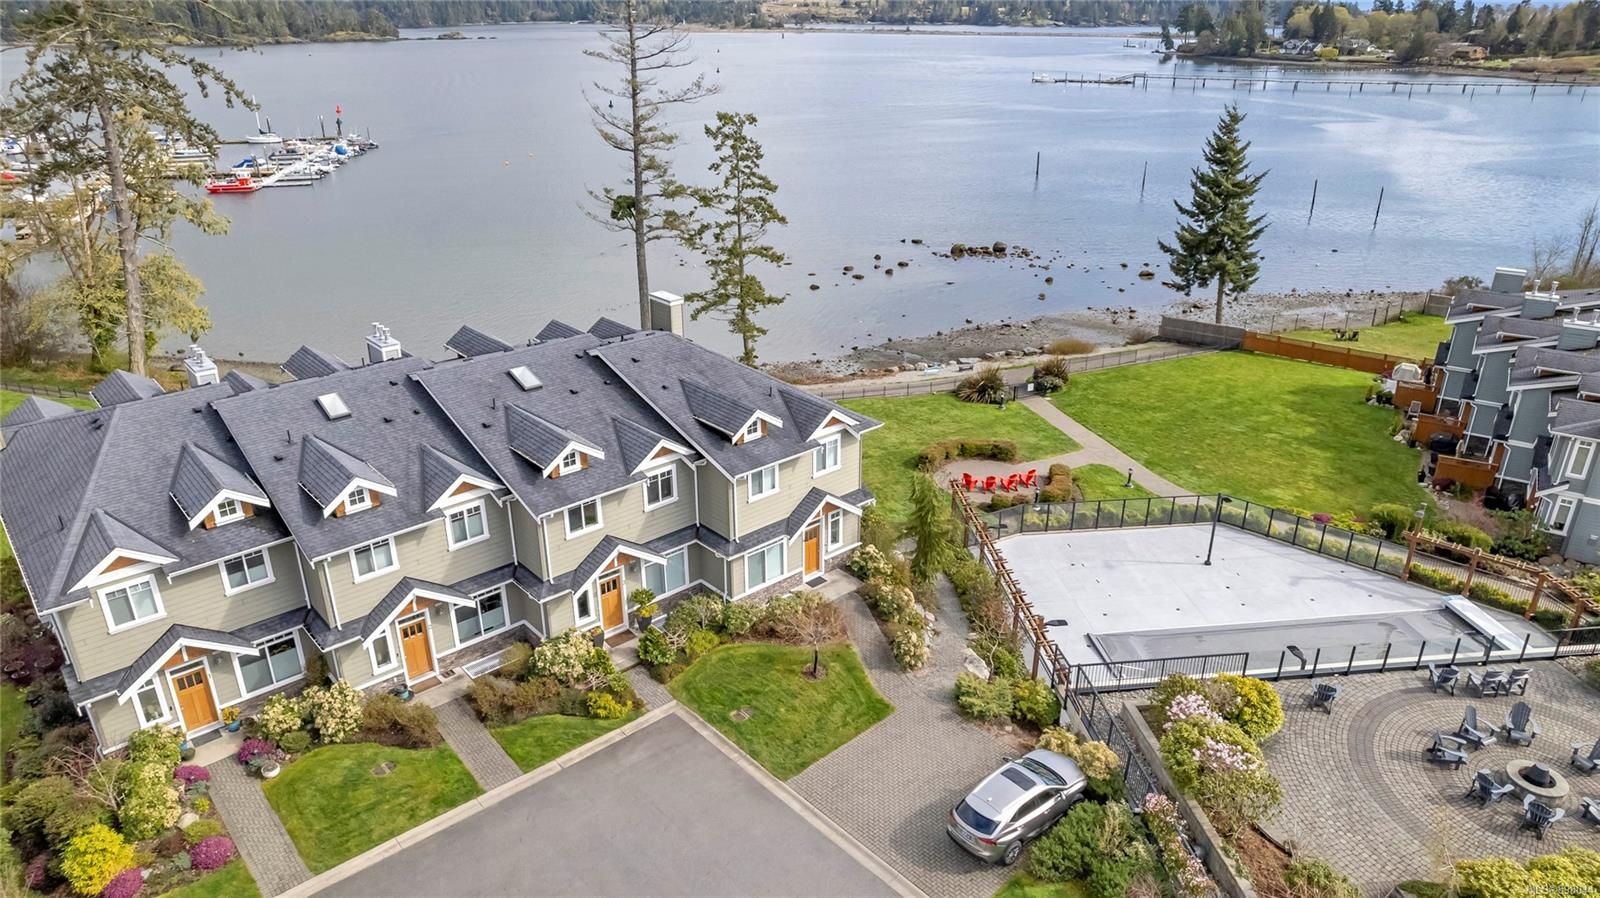 Open House. Open House on Sunday, August 7, 2022 12:00PM - 2:00PM
Stunning Oceanfront Sooke Townhouse in Heron View with 4 bedrooms and 4 bathrooms and all the amenities you can imagine. Open house this SUNDAY August 7th 12 pm to 2pm. $1,199,000.00 and Pr